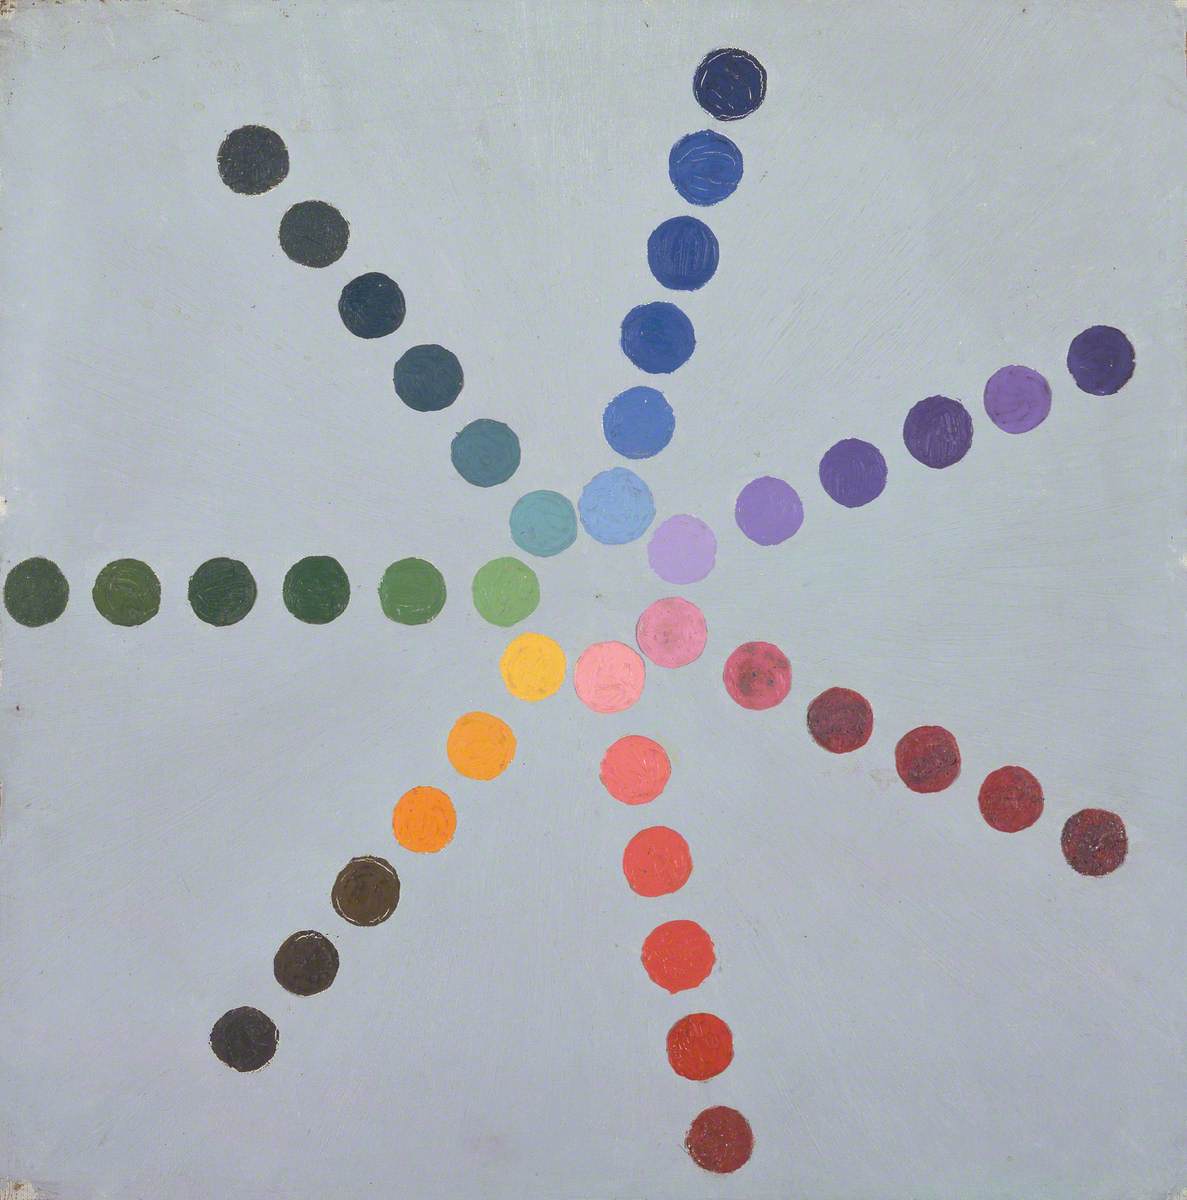 Multi-Colored Dots on a Gray Ground